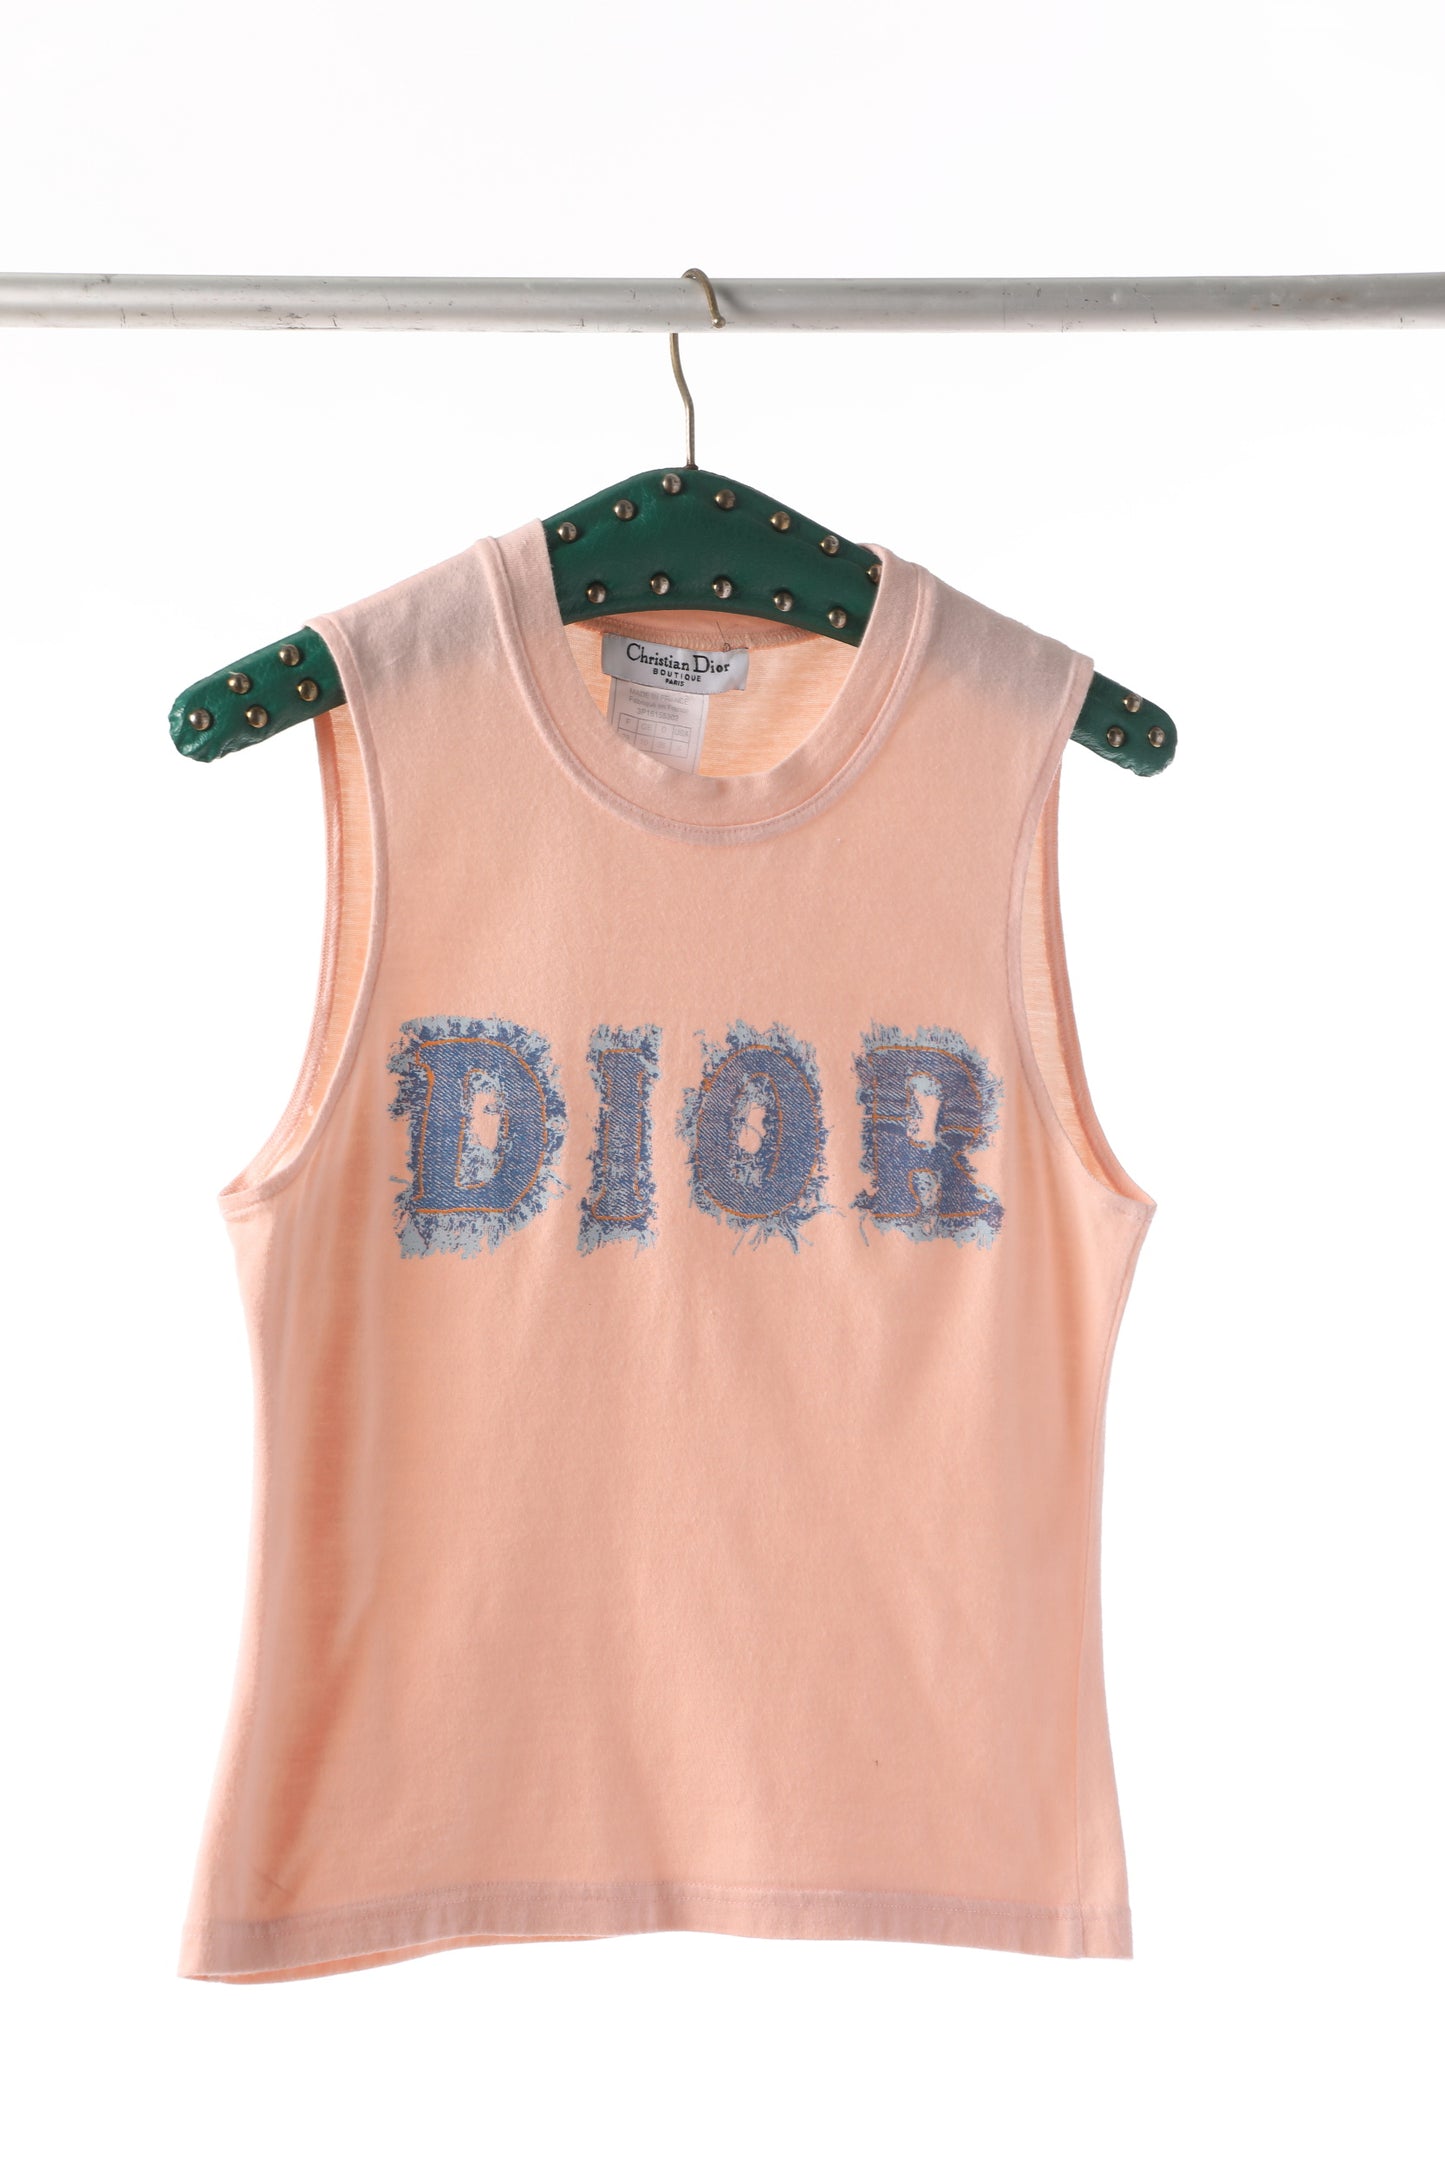 Dior 90s jeans effect t-shirt